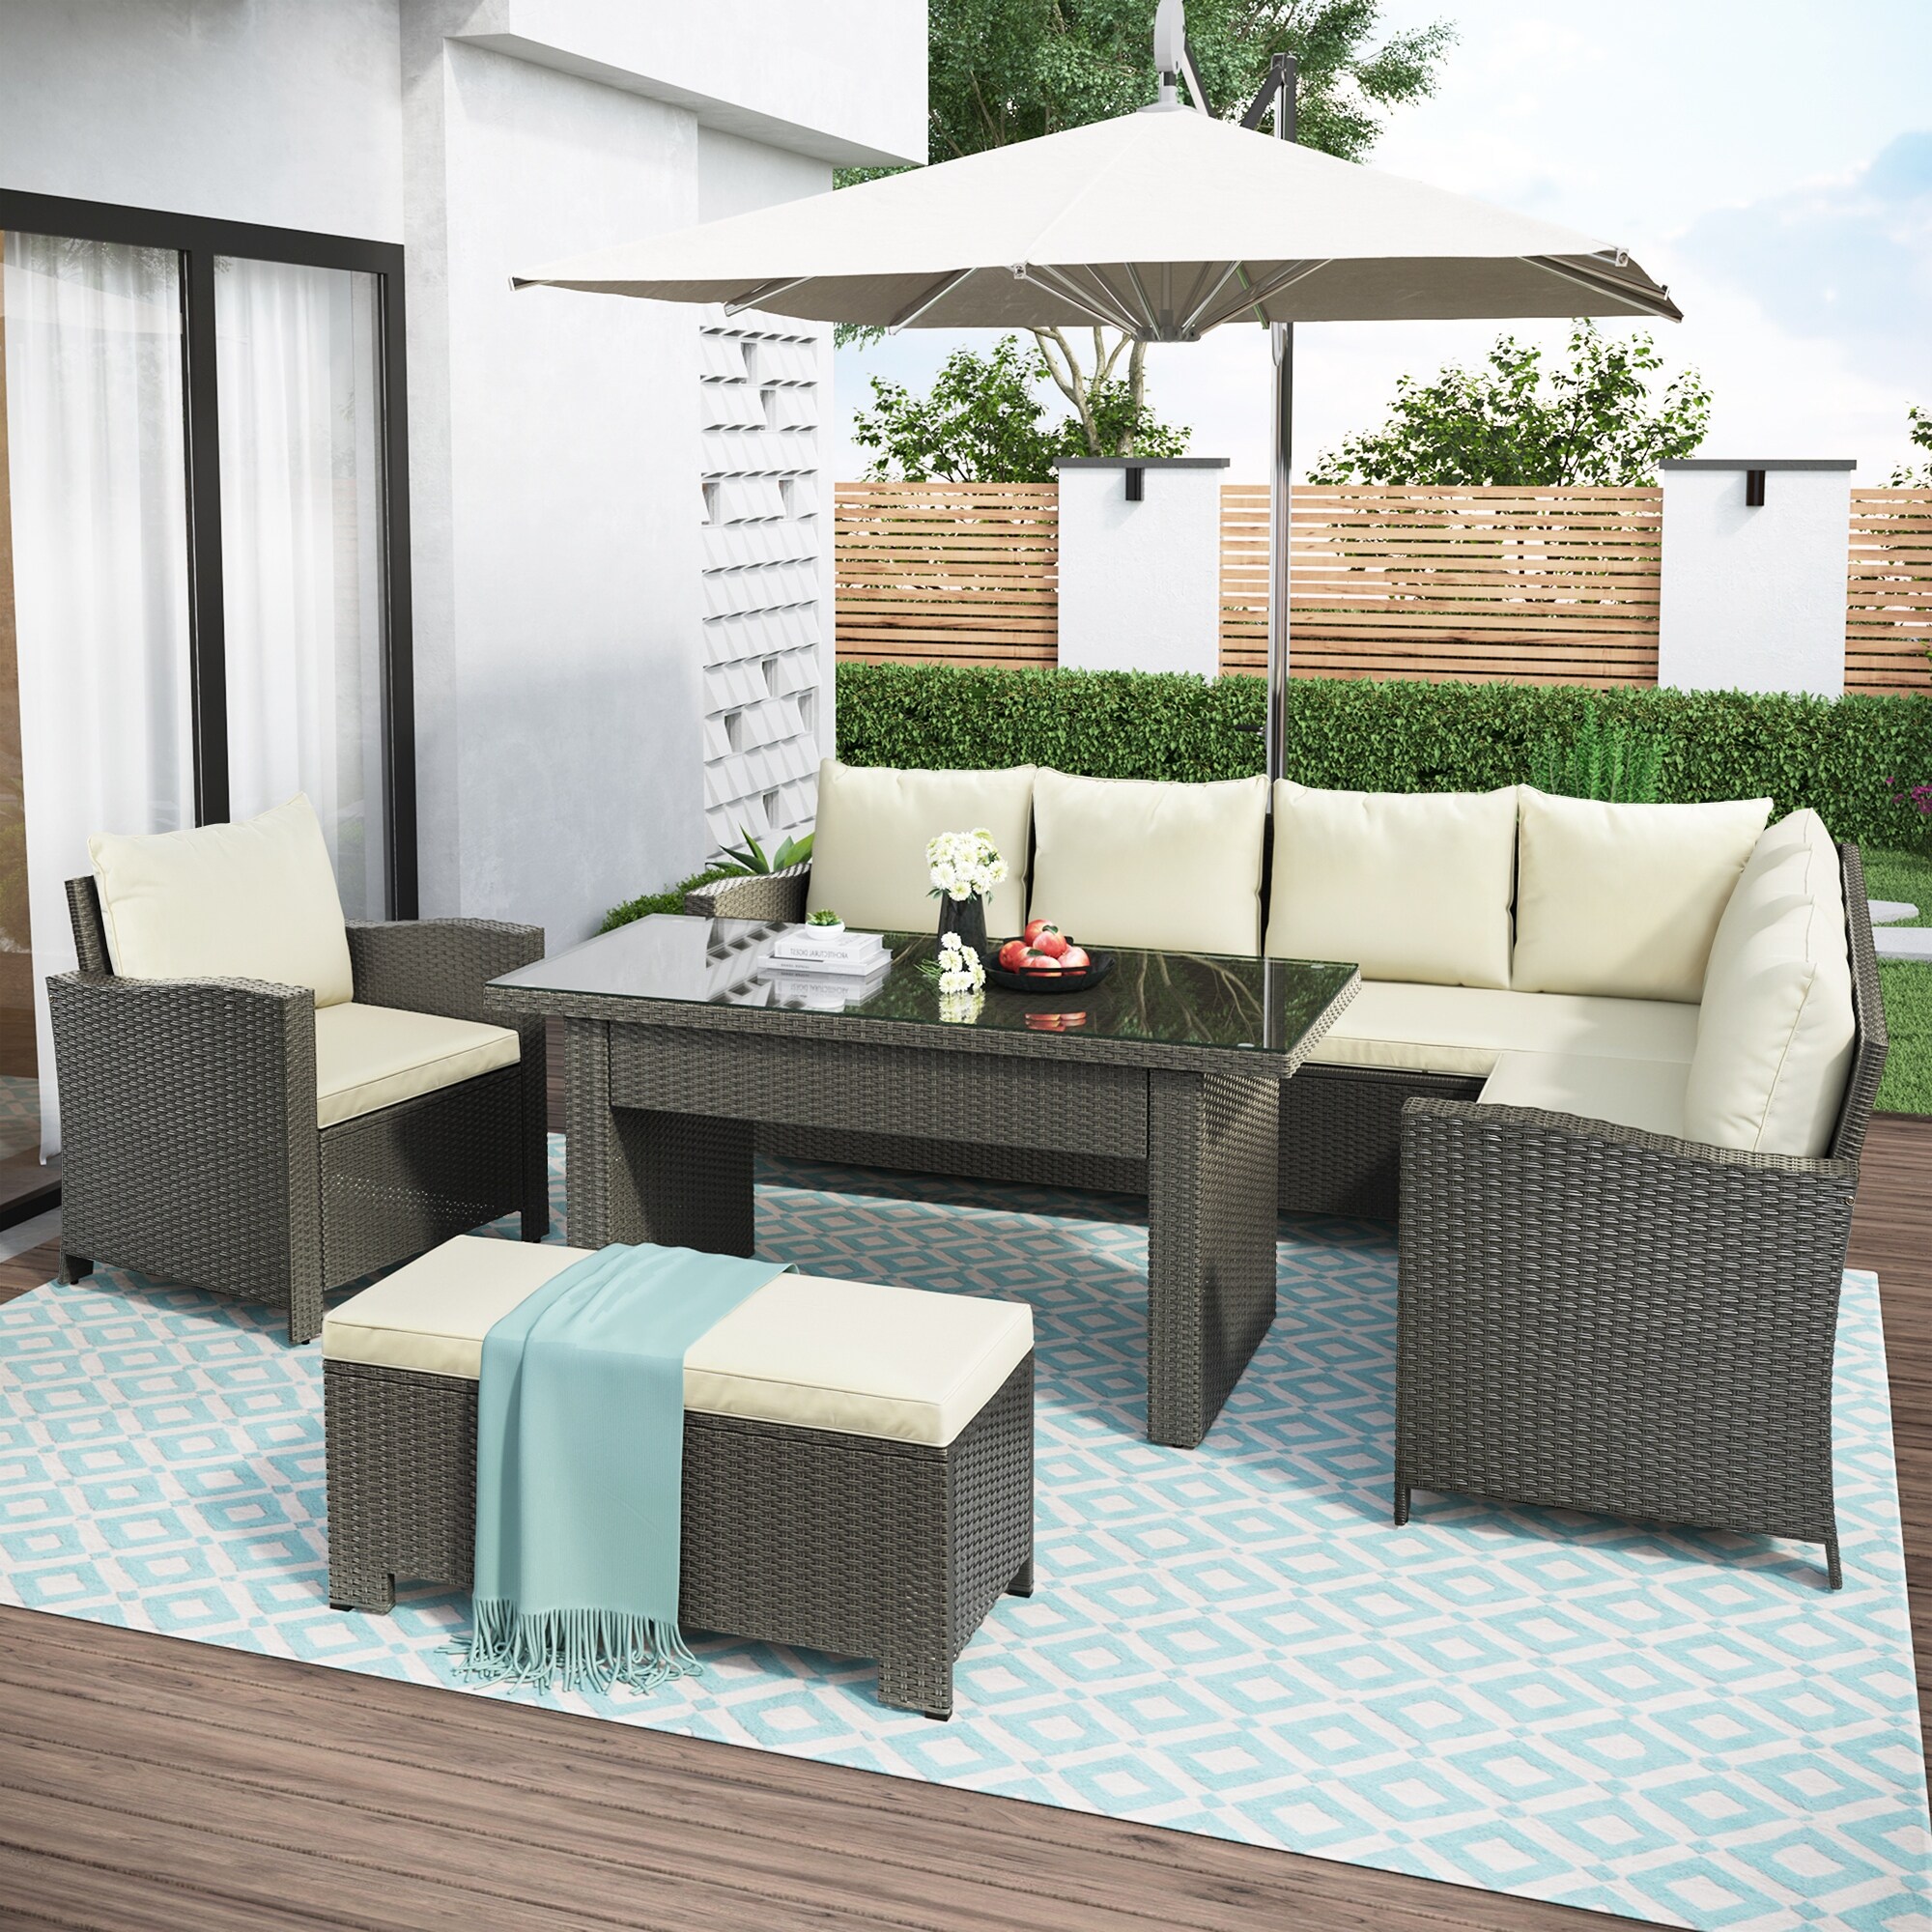 6-piece Patio Furniture Set With Dining Table and Bench